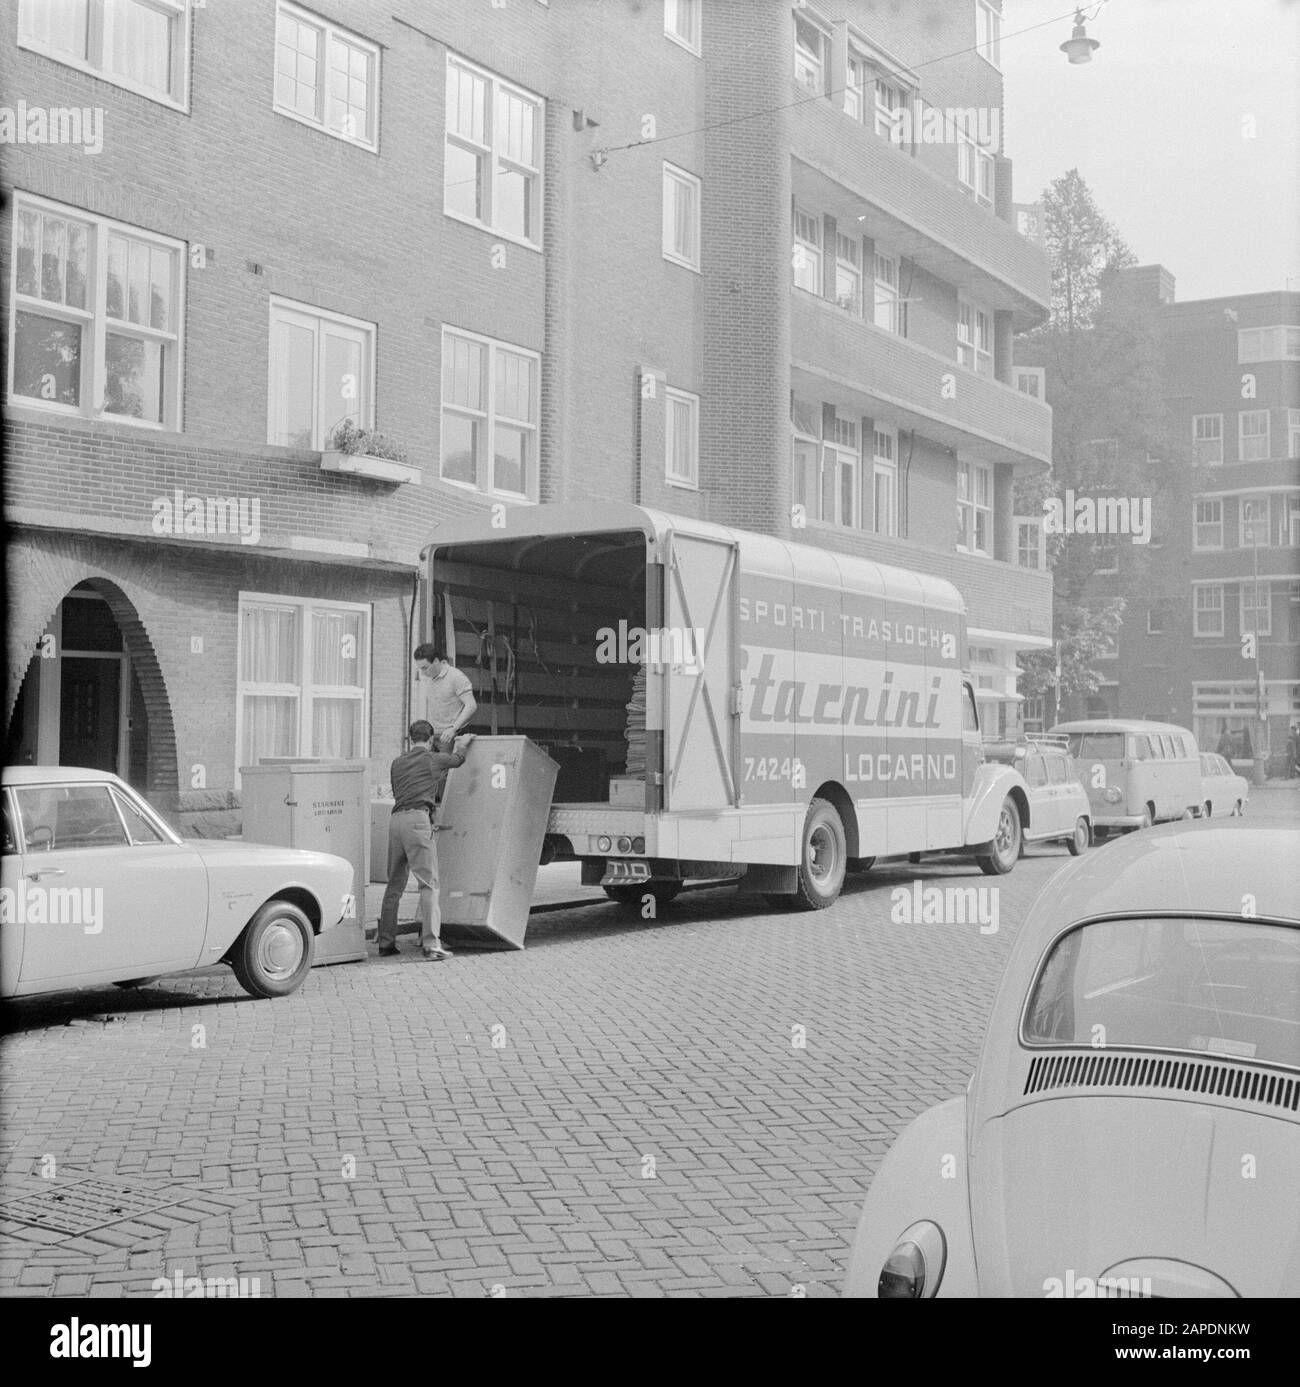 Living in Ascona Description: Amsterdam. De Van der Polls moving: two men loading or unloading a moving car from an Italian moving company from Locarno Date: 1 January 1967 Location: Amsterdam, Noord-Holland Keywords: street images, removals, trucks, homes Stock Photo